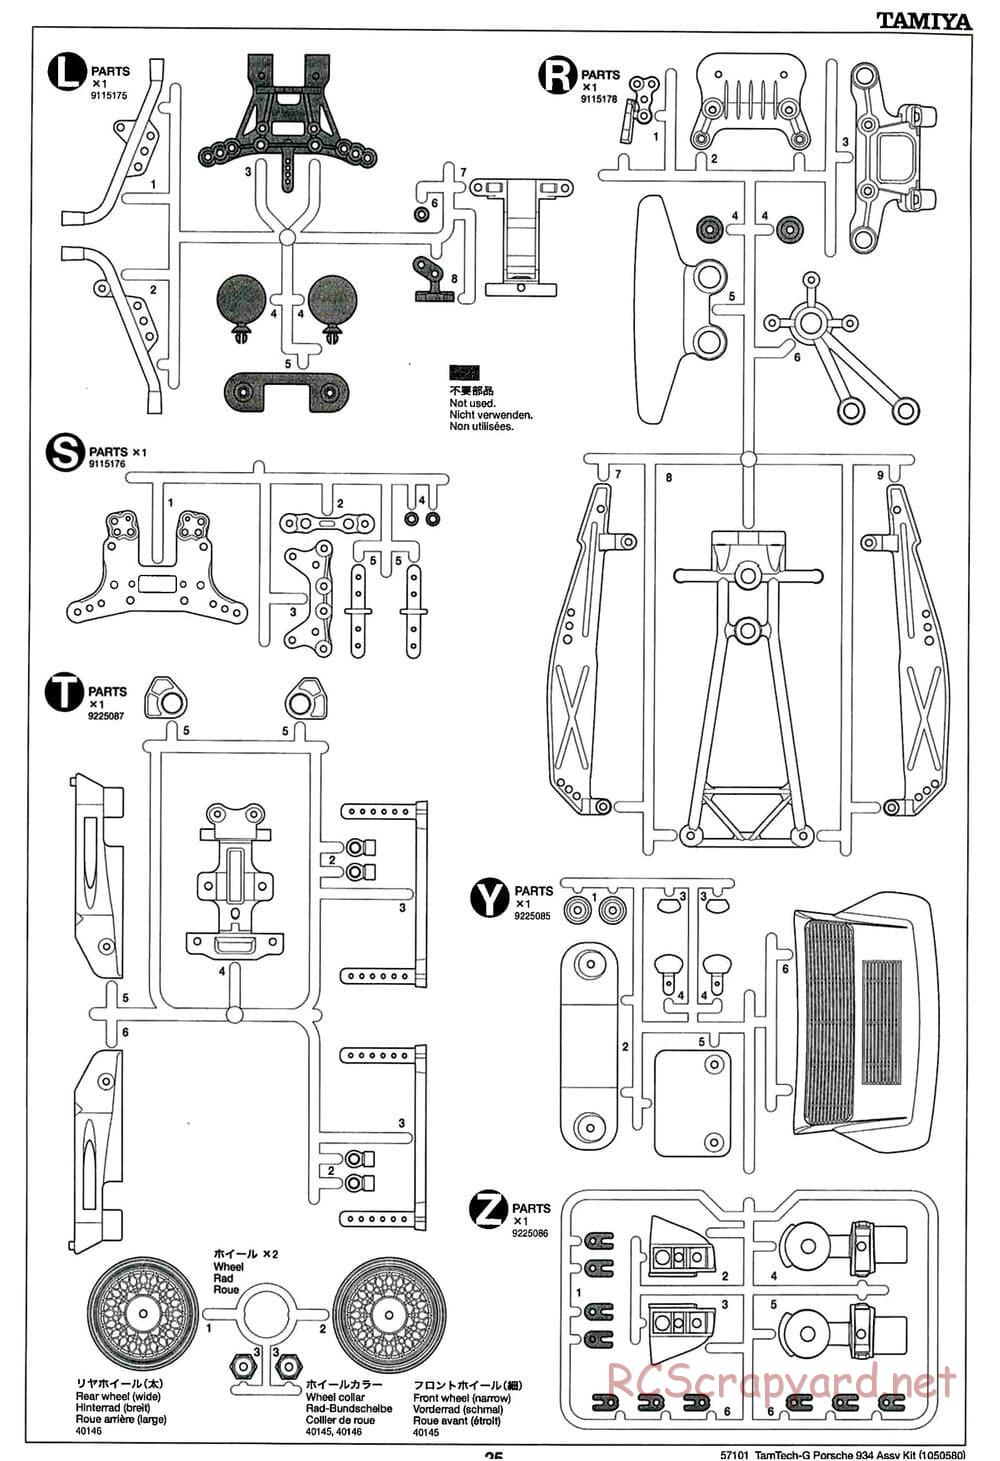 Tamiya - Porsche Turbo RSR - GT-01 Chassis - Manual - Page 25